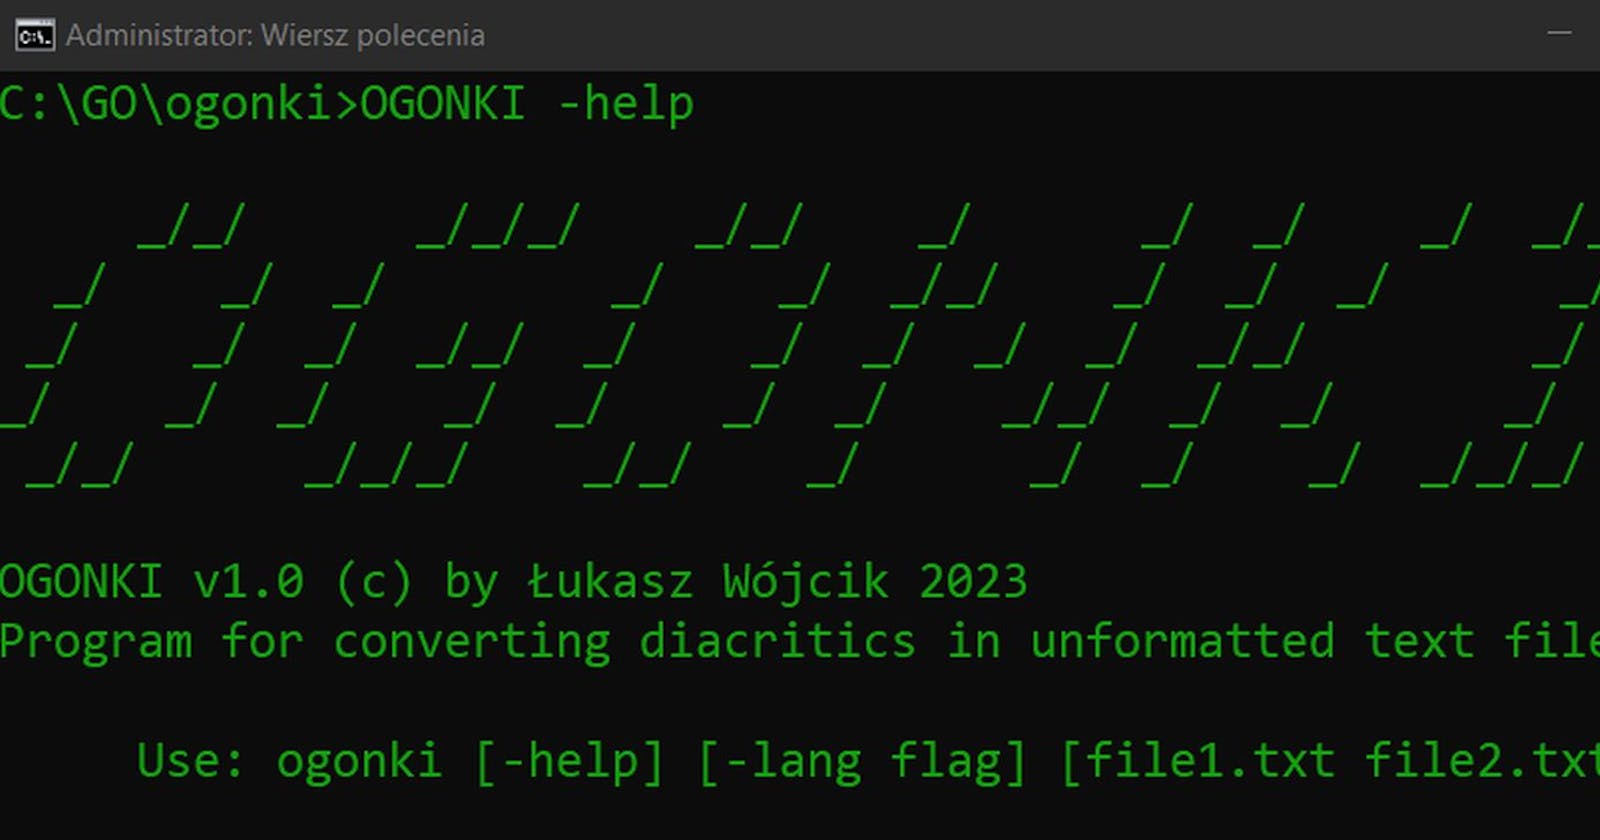 Replace Diacritical Marks in Unformatted Text Files Encoded in UTF-8 format (66 languages)